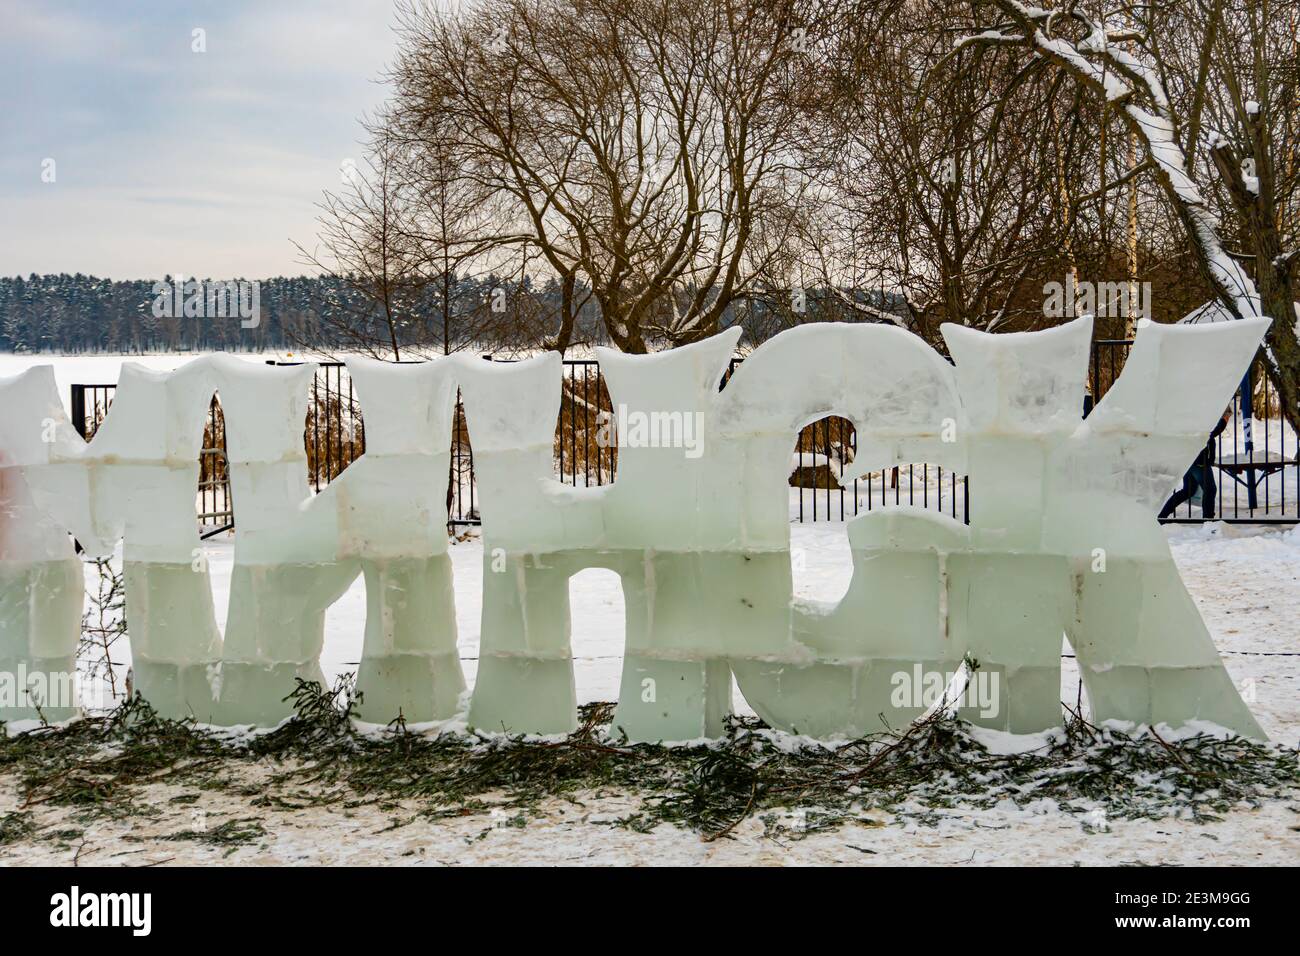 The inscription in large letters the city of Minsk made of ice in winter Stock Photo